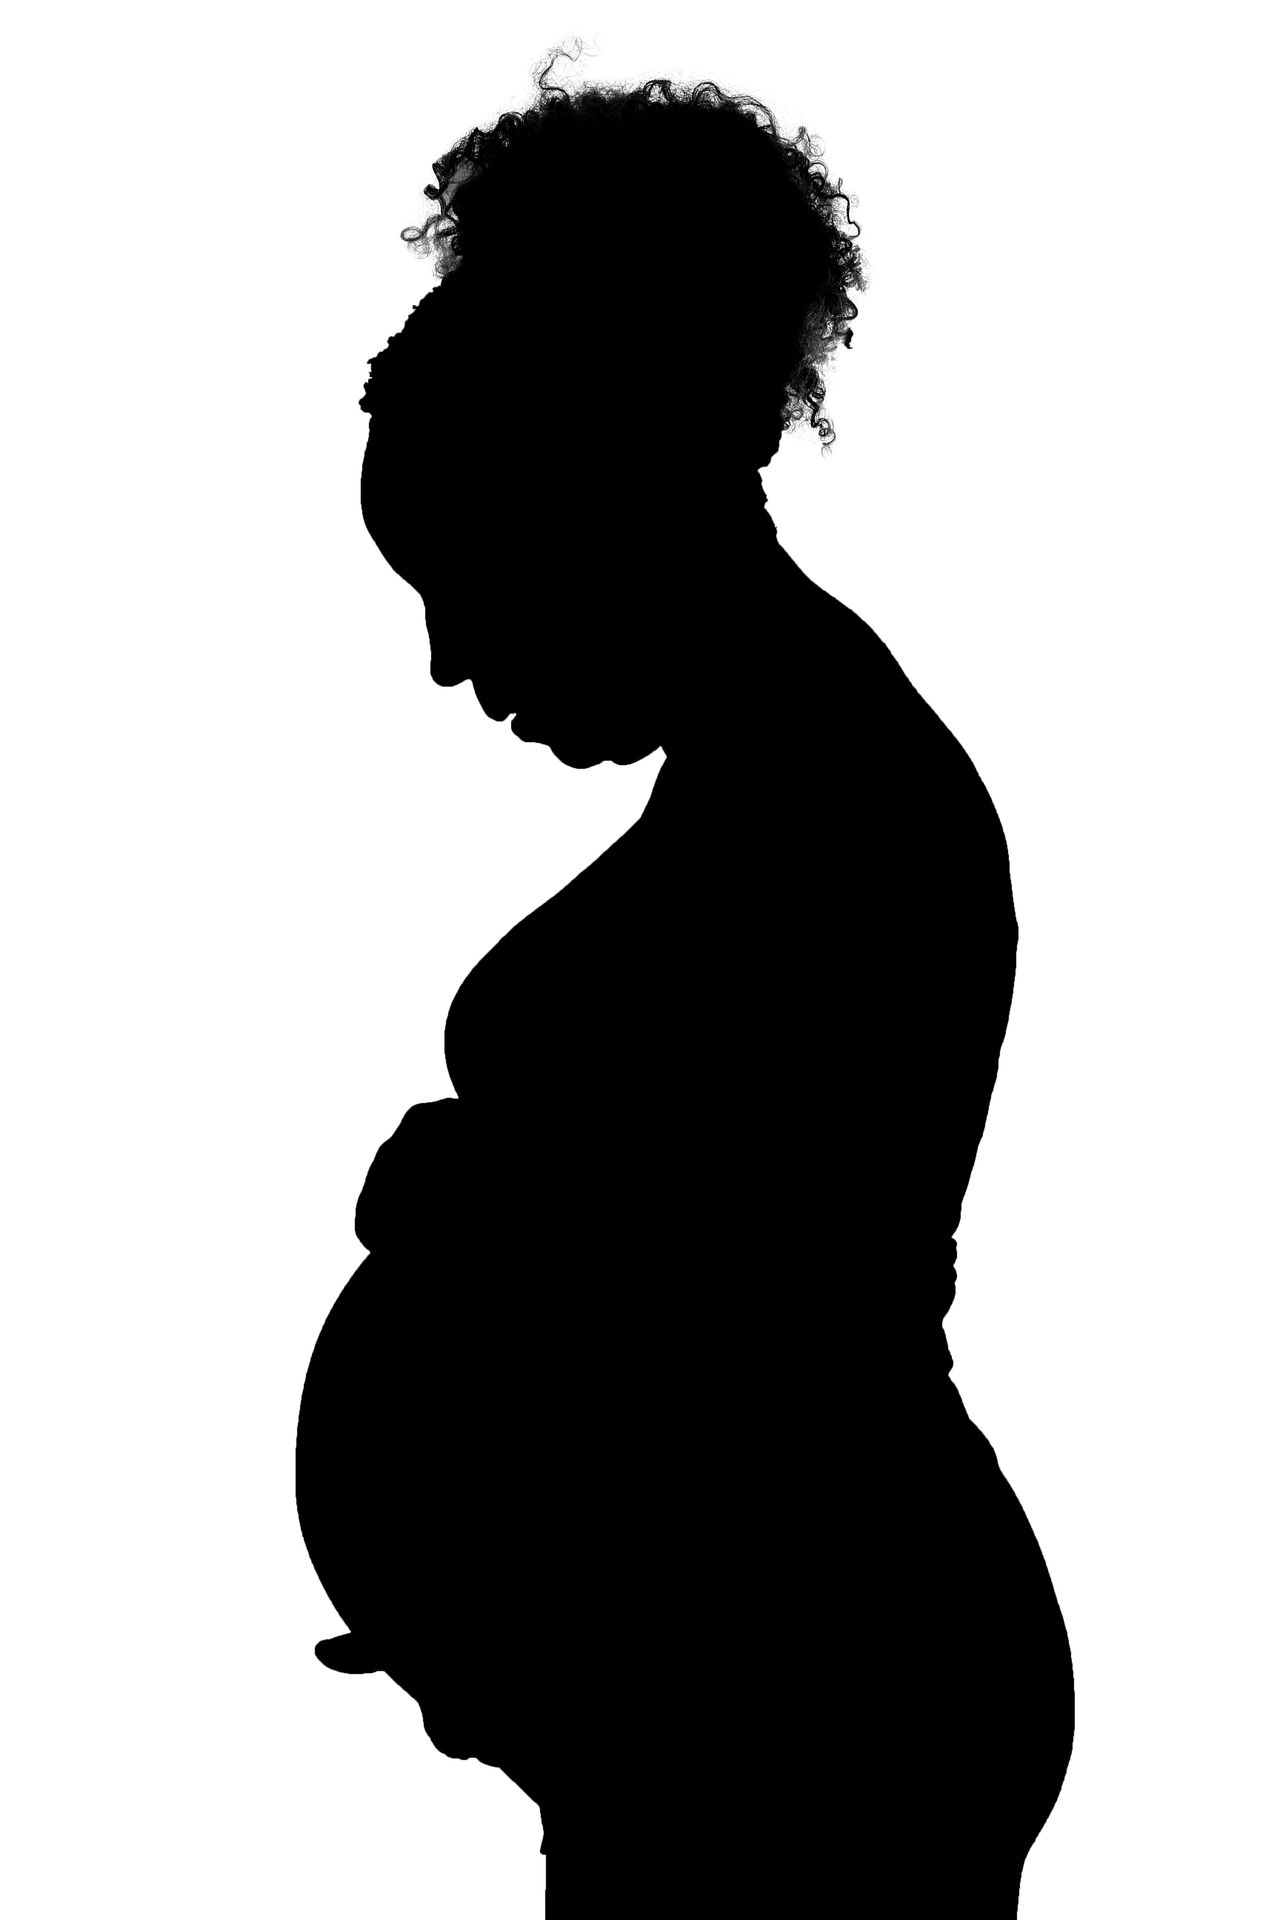 For every 100,000 live births, nearly 43 black women will die, according to a recent CDC study.